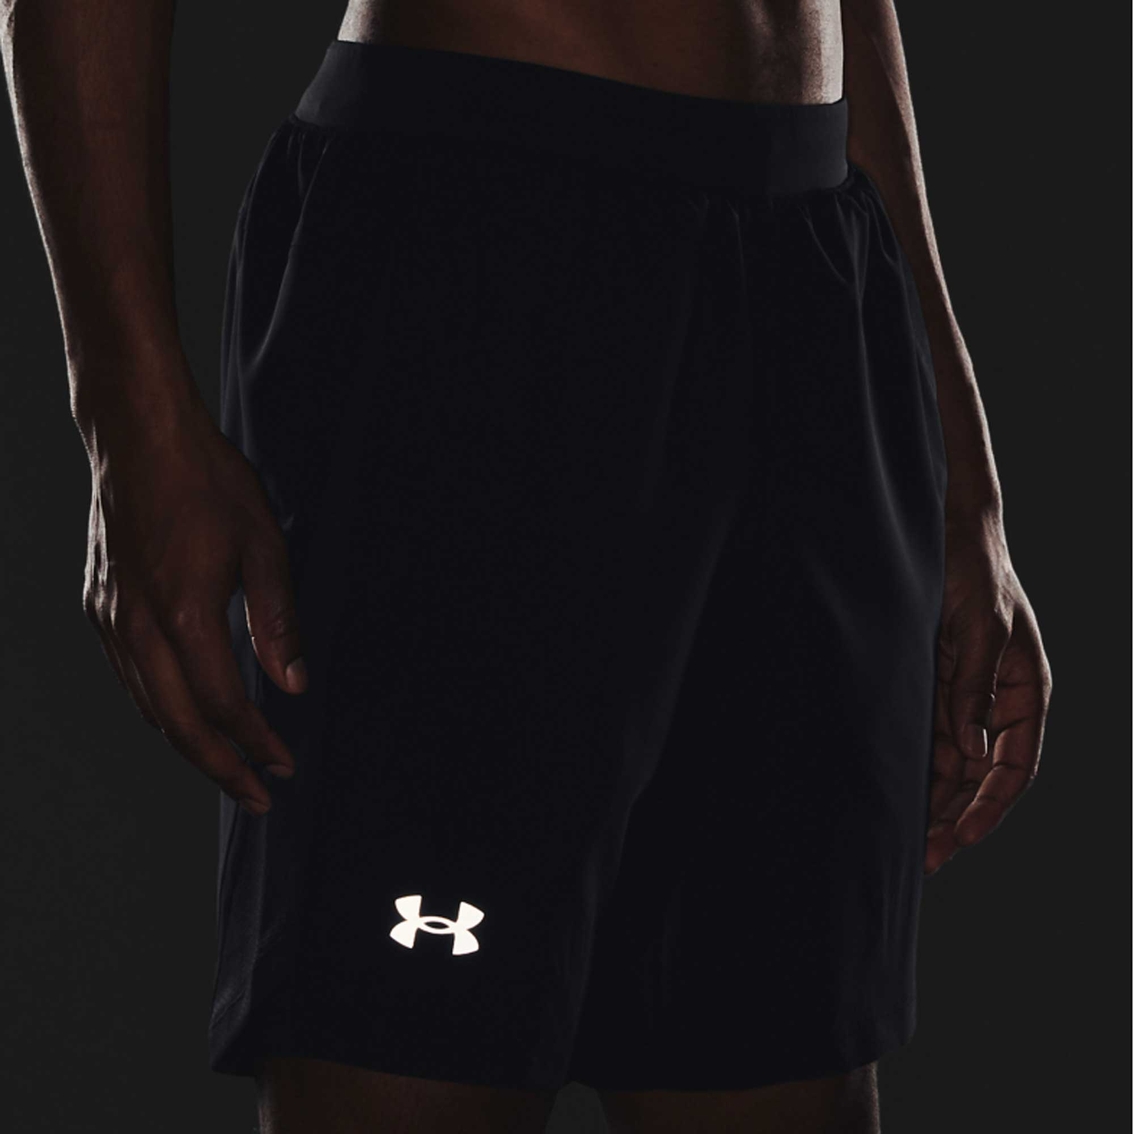 Under Armour Launch Run 2-in-1 Shorts | Shorts | Clothing & Accessories ...